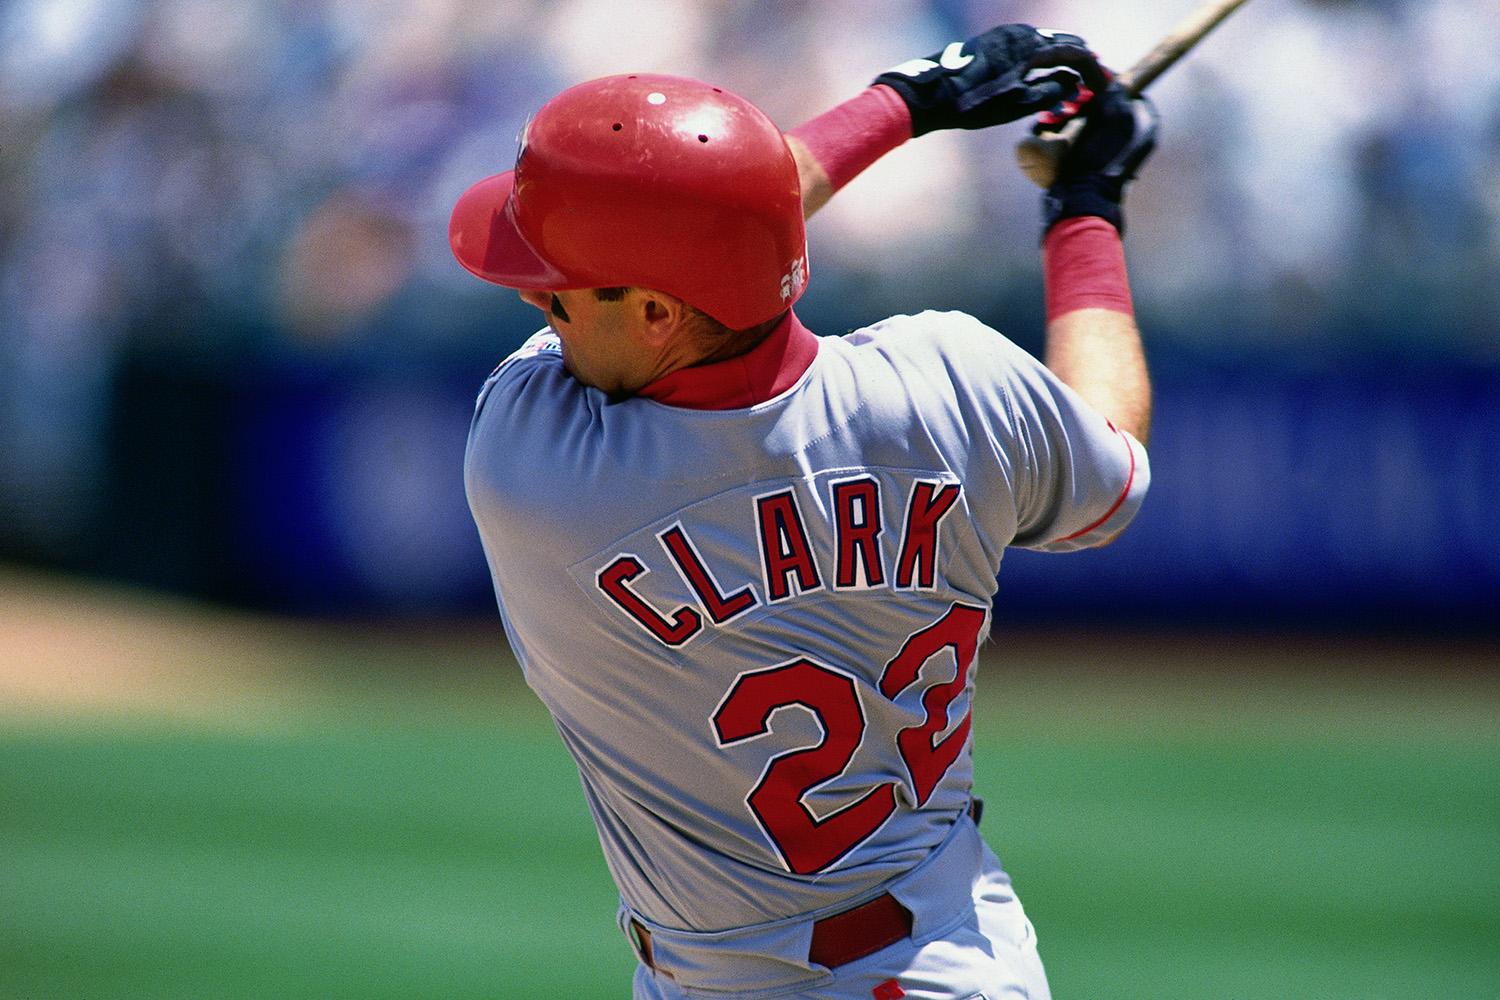 Thrill of Success: Will Clark debuts on Today's Game ballot